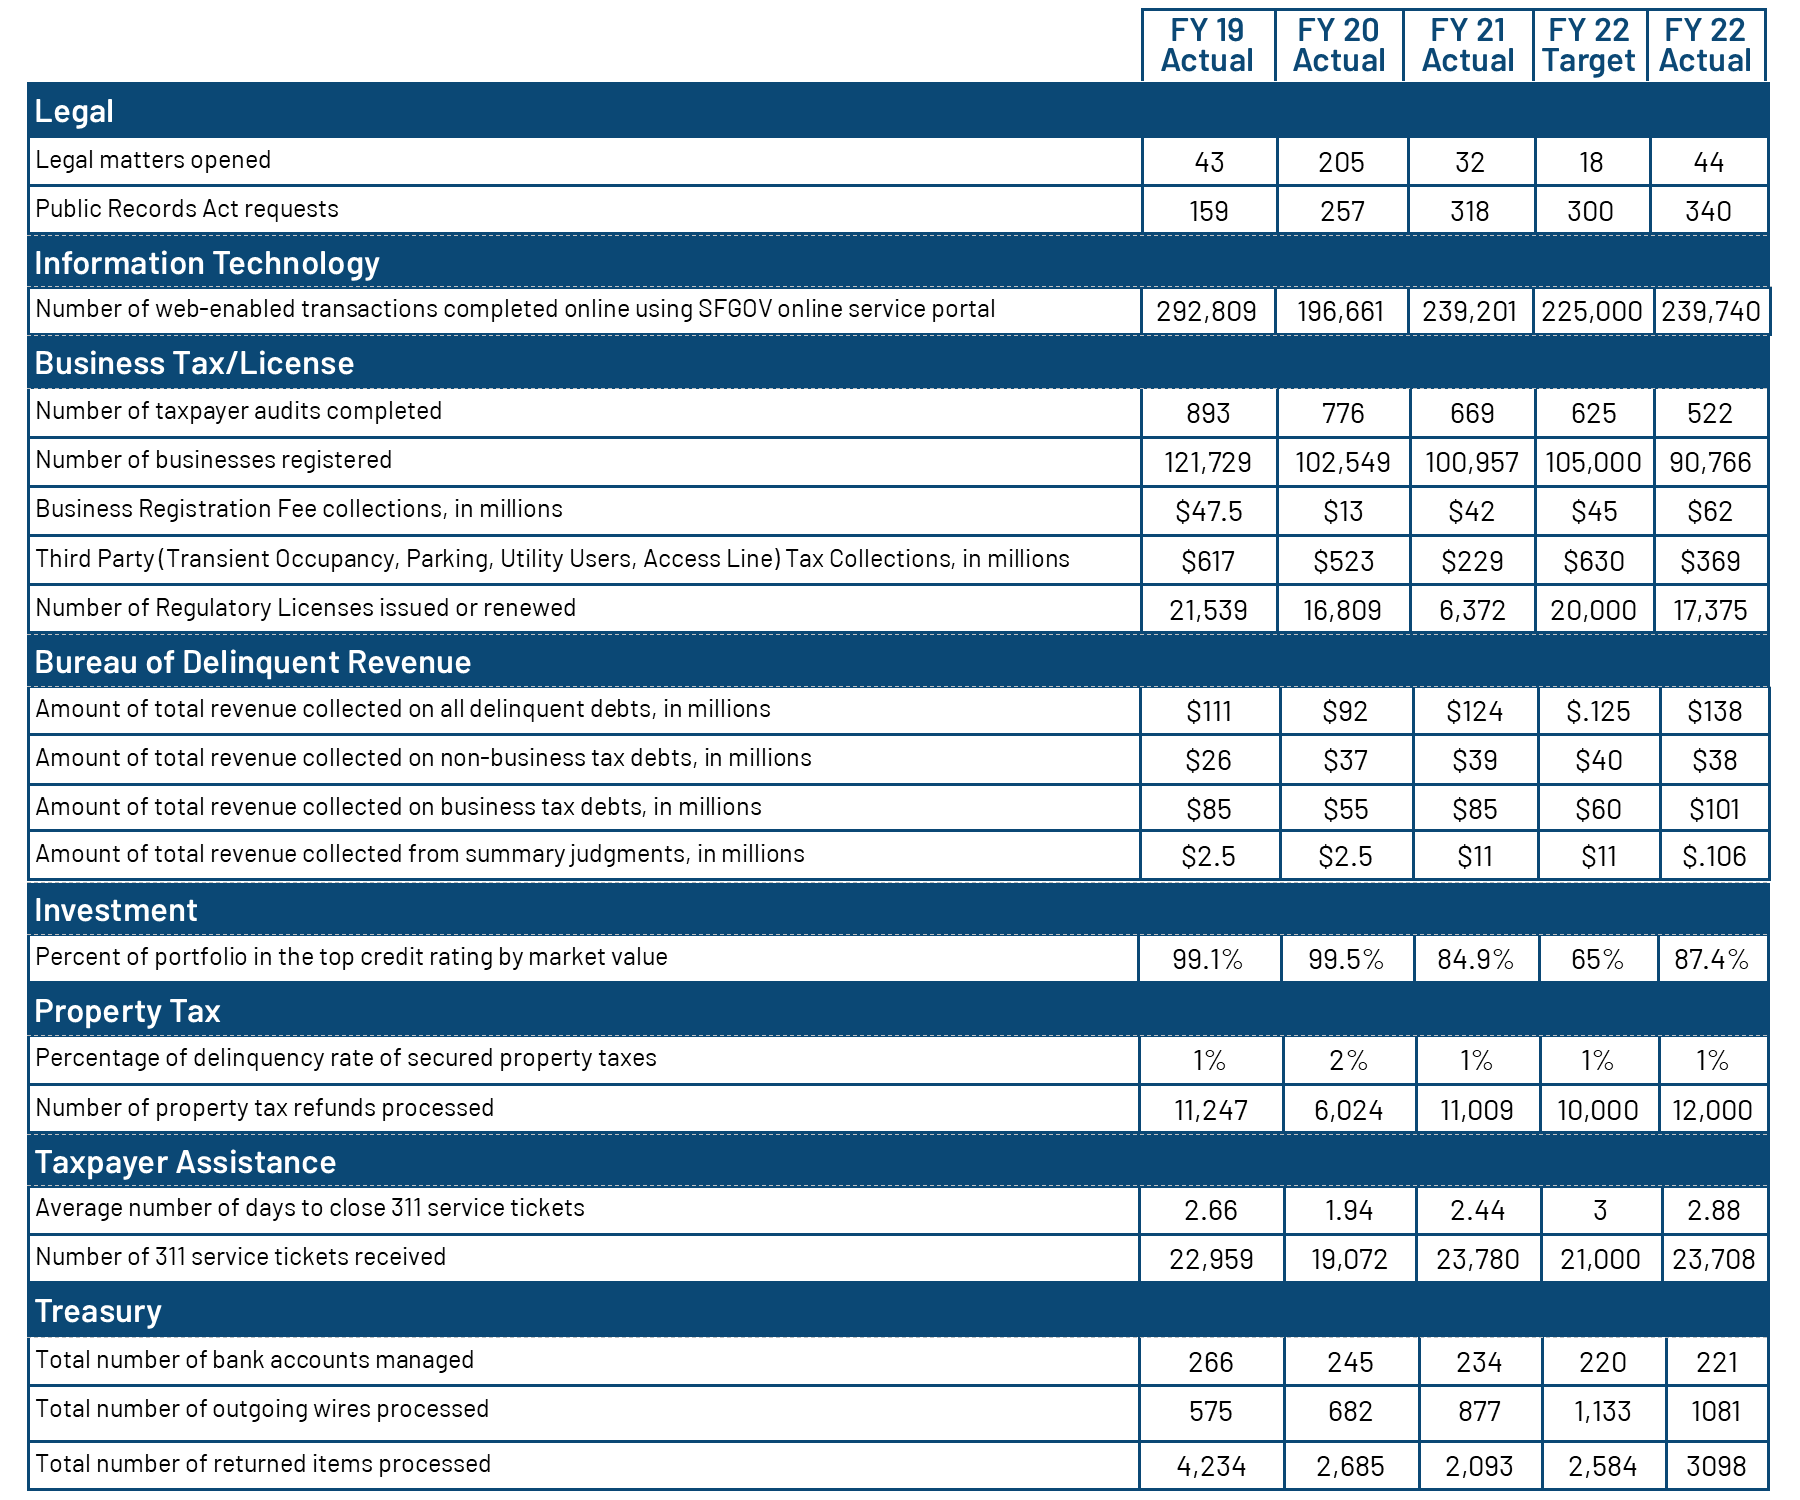 FY 20-21 Performance measures